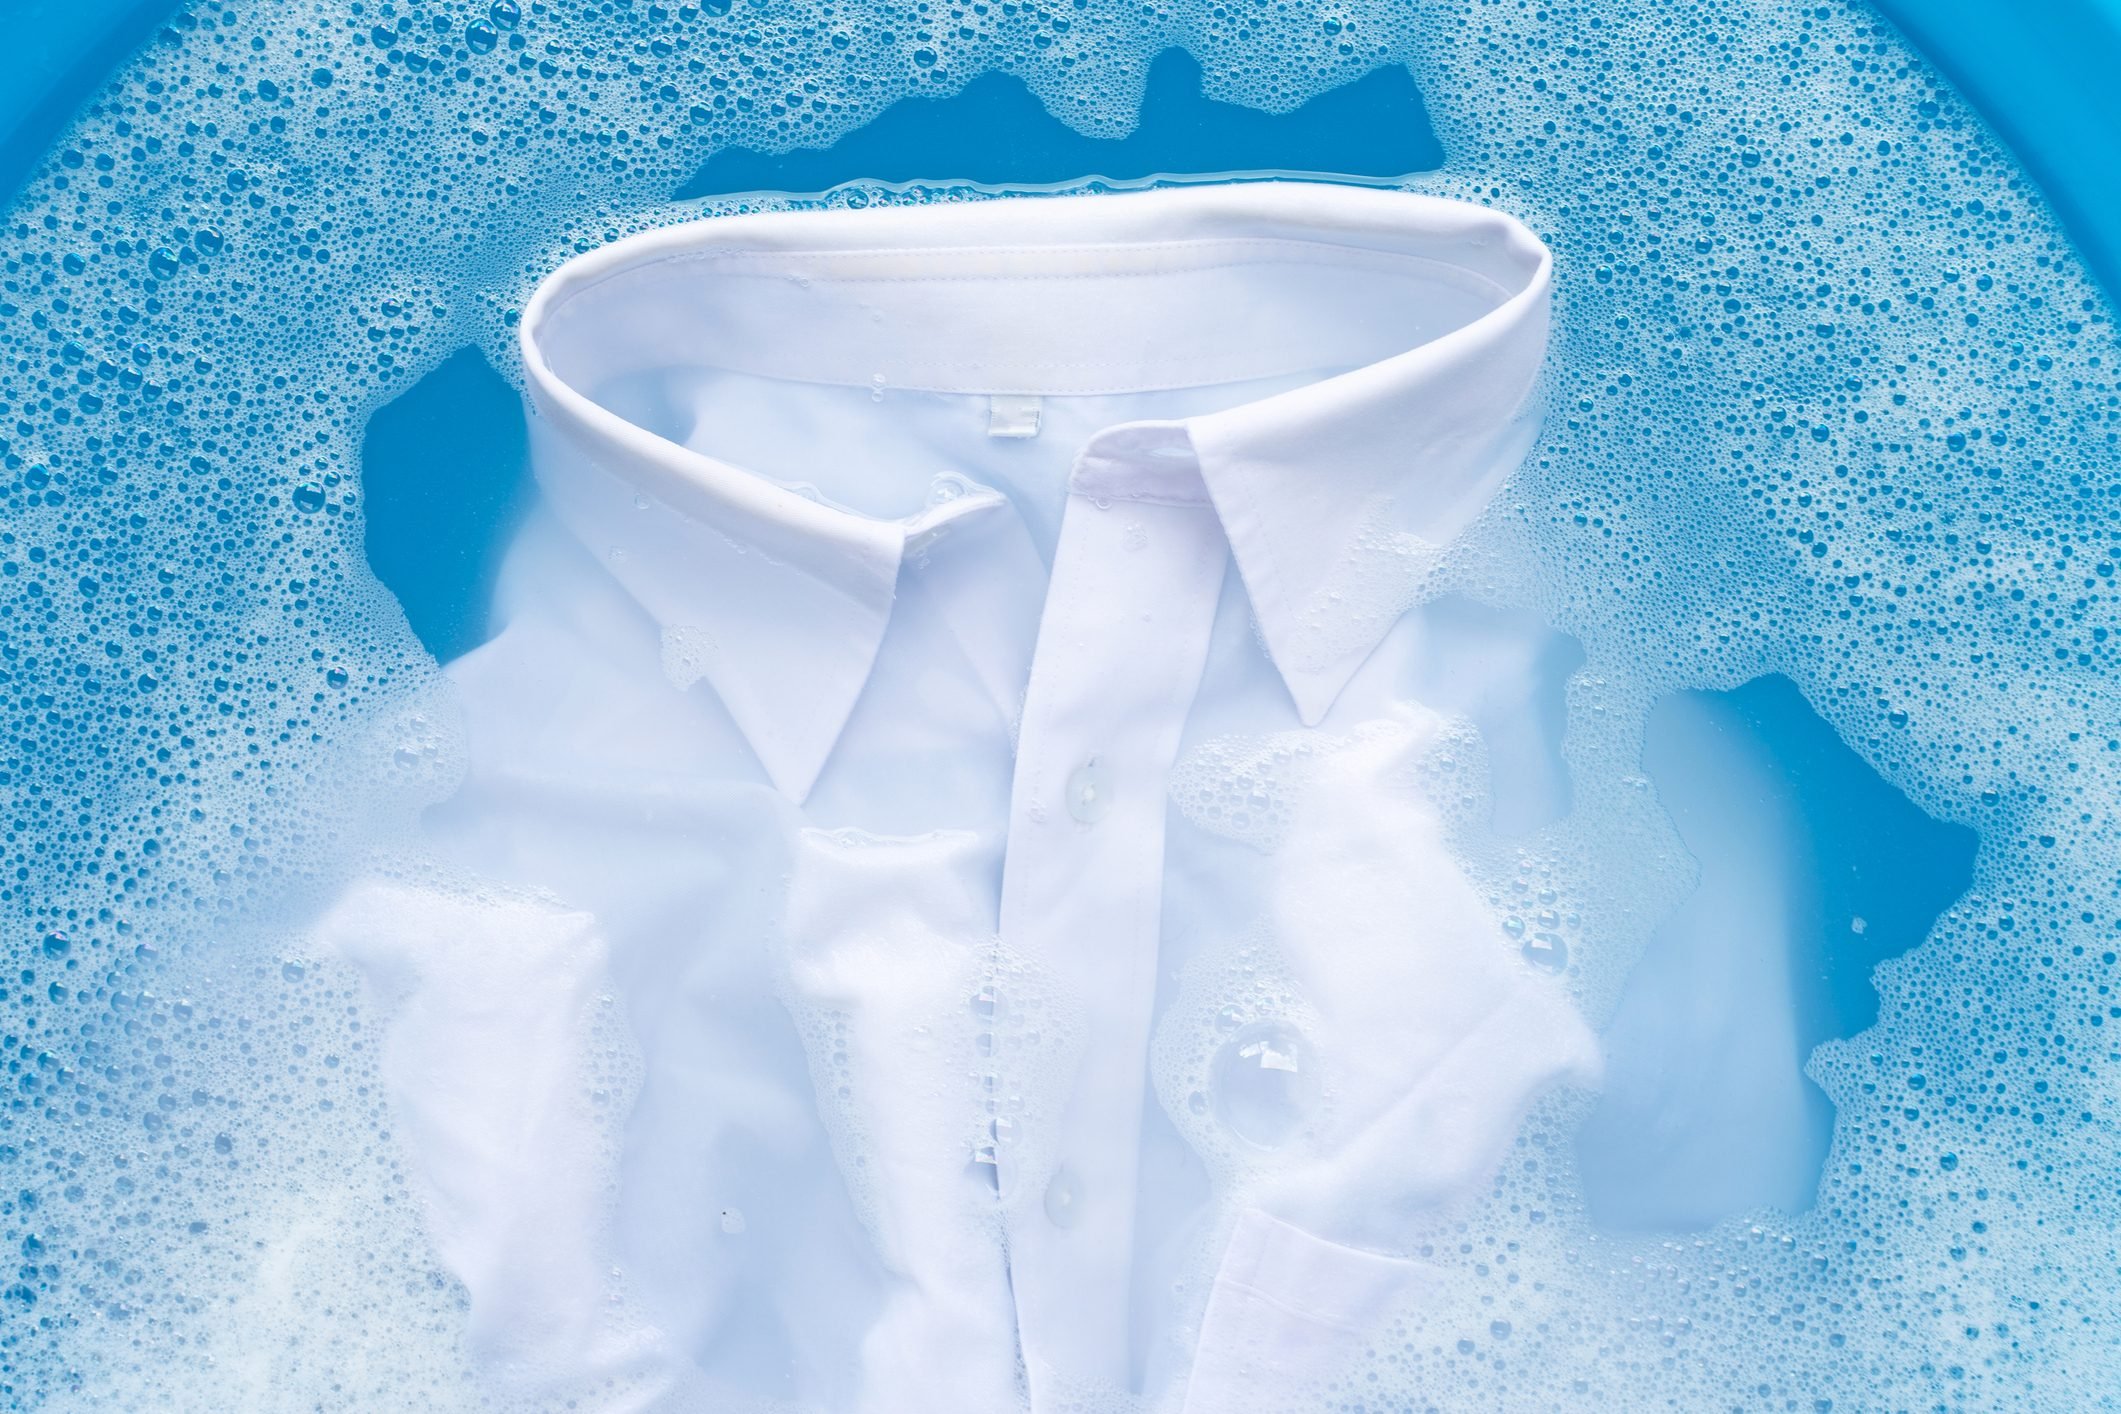 Liquid Laundry Bluing: The Ultimate Guide